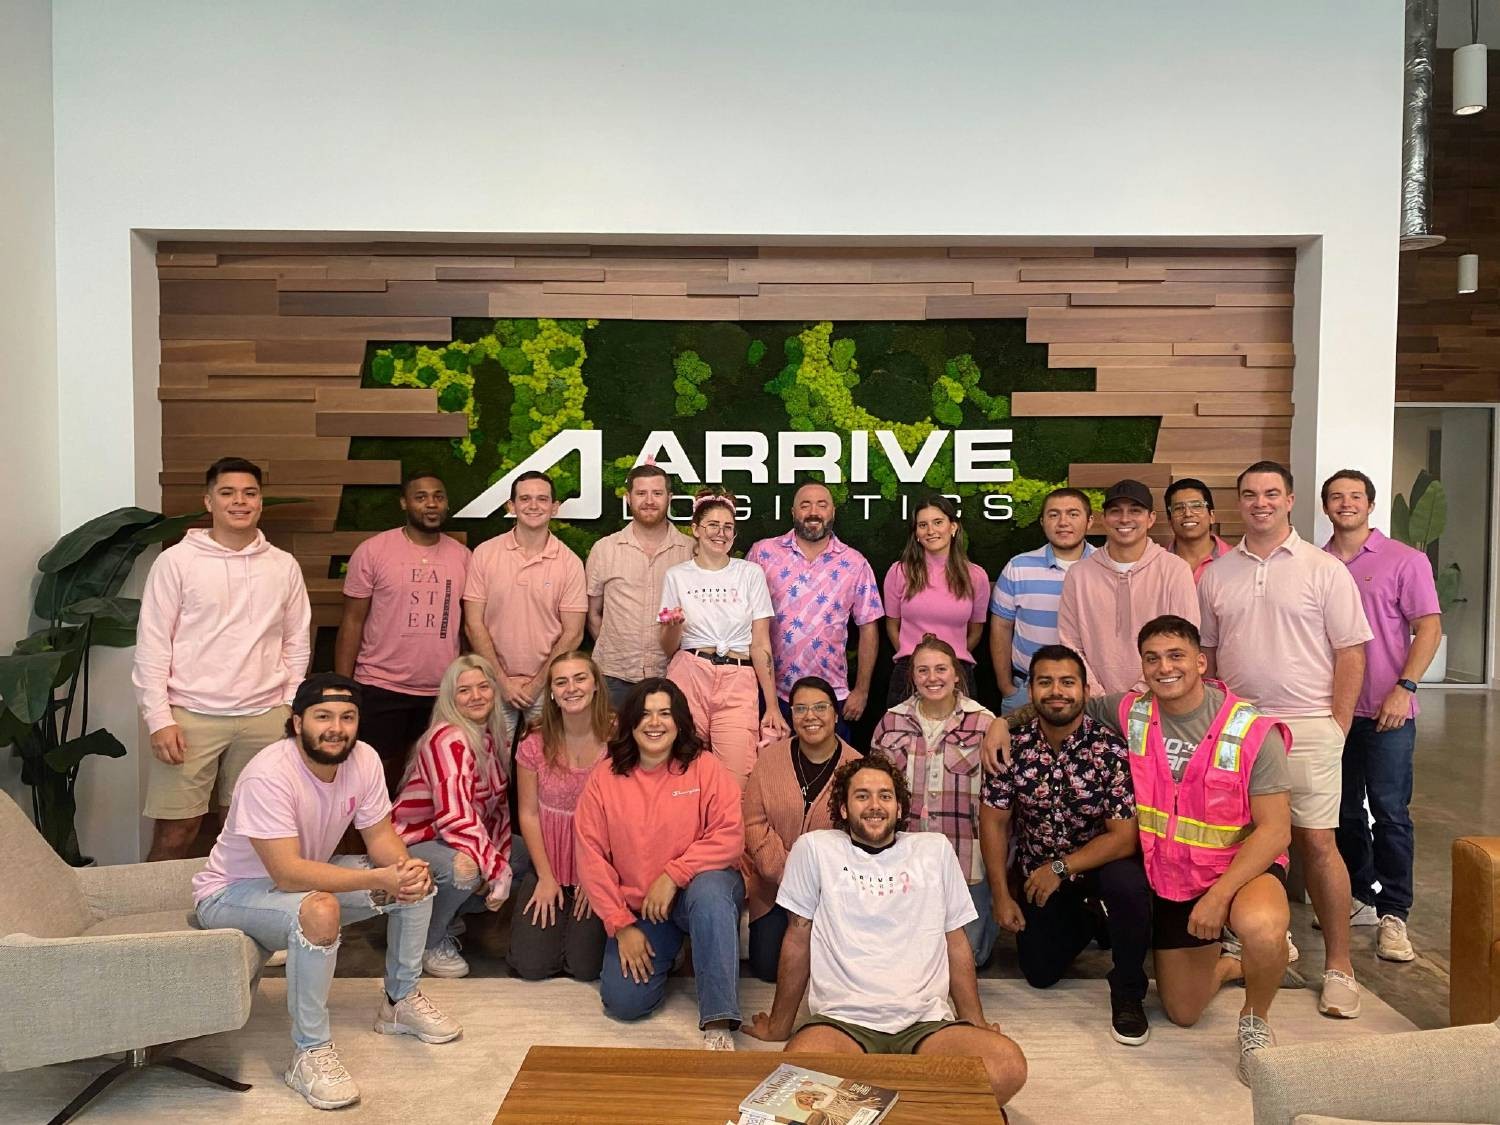 Arrive Logistics recognizes Breast Cancer Awareness Month by raising $3,000+ to support local women's health nonprofits